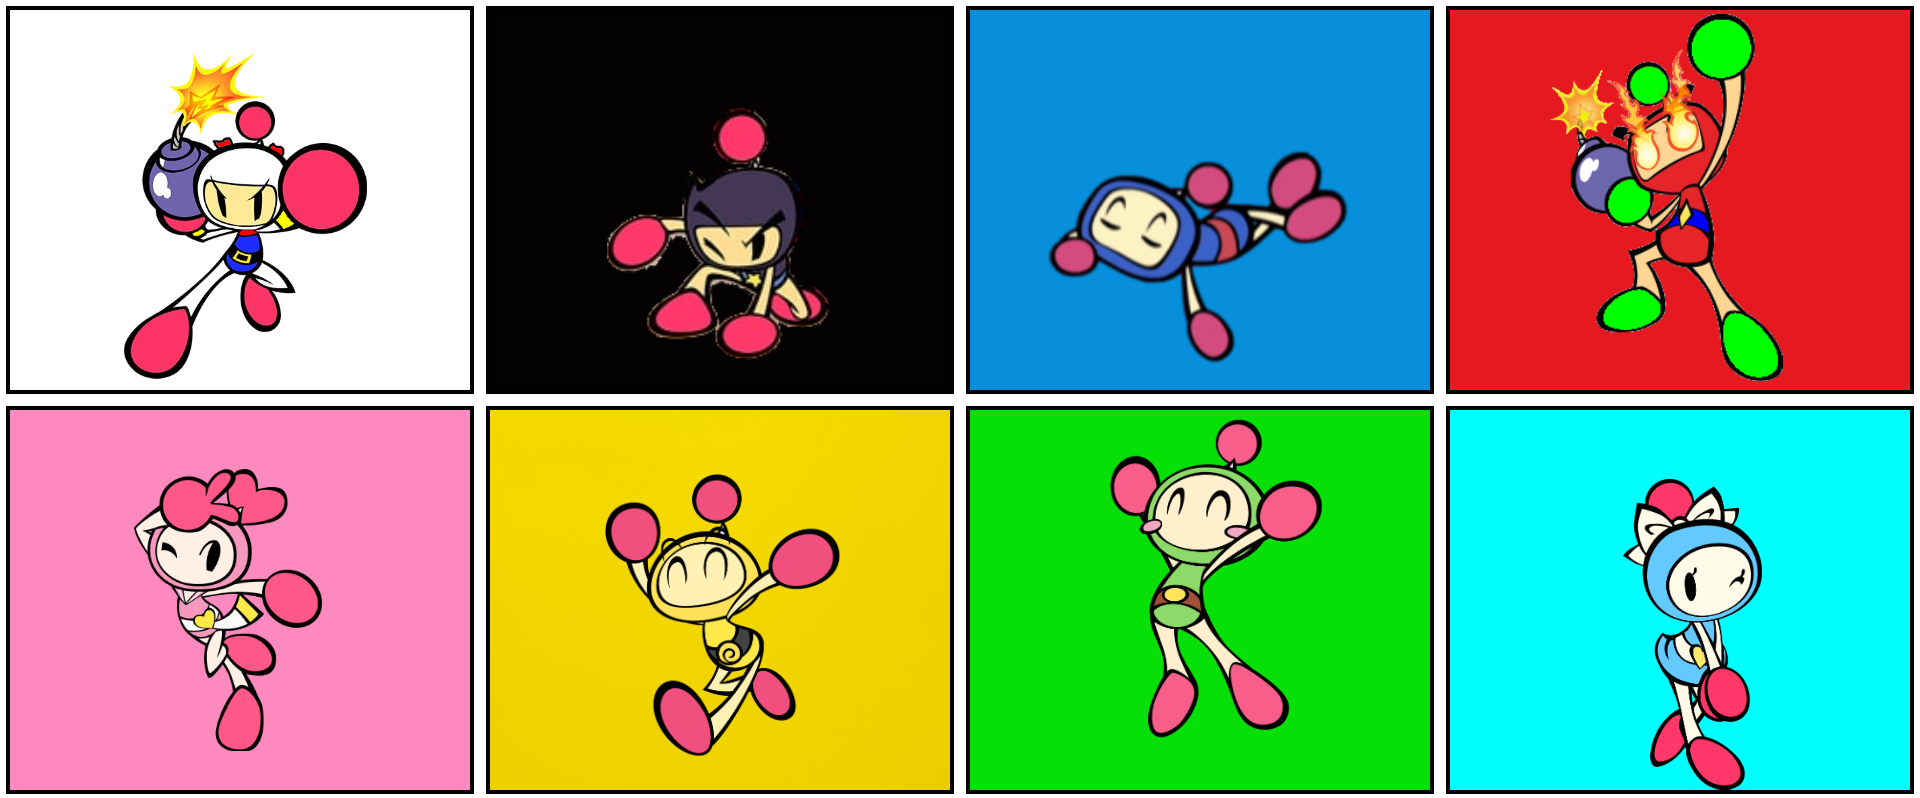 High Quality Bomberman Bros with their background colors Blank Meme Template